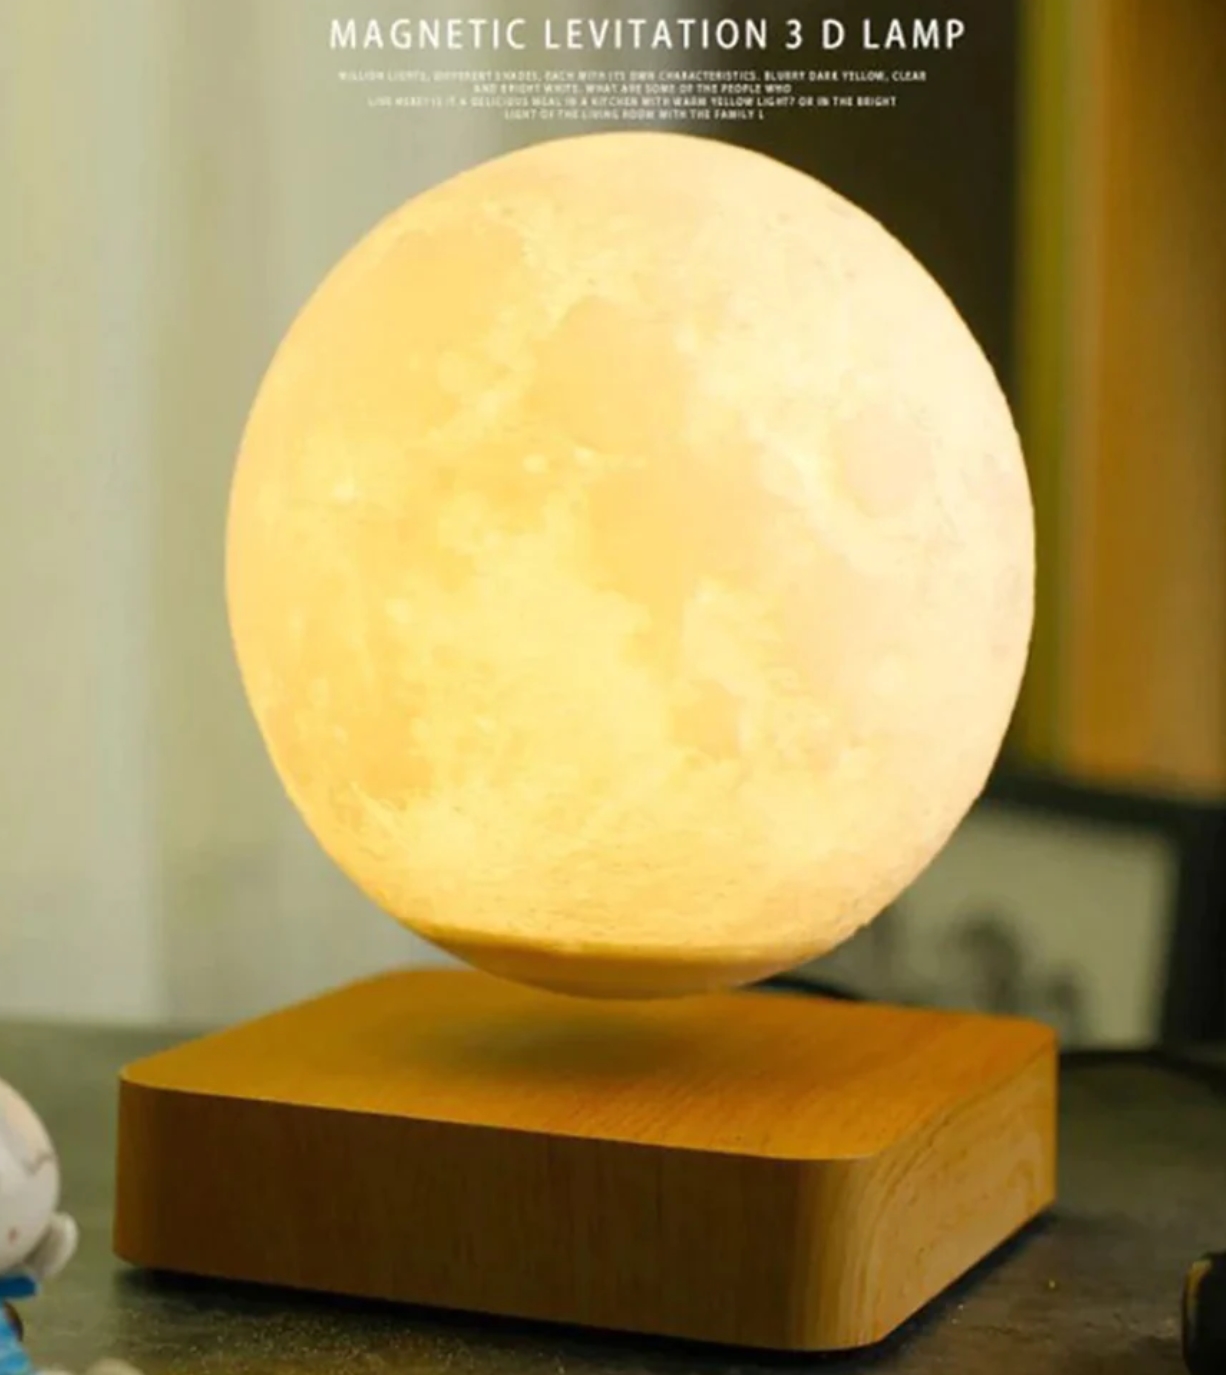 Hot Selling Creative 3D Printing Moon Light Creative Floating Magnetic levivitation 6inch luna Bulb Birthday And Decoration